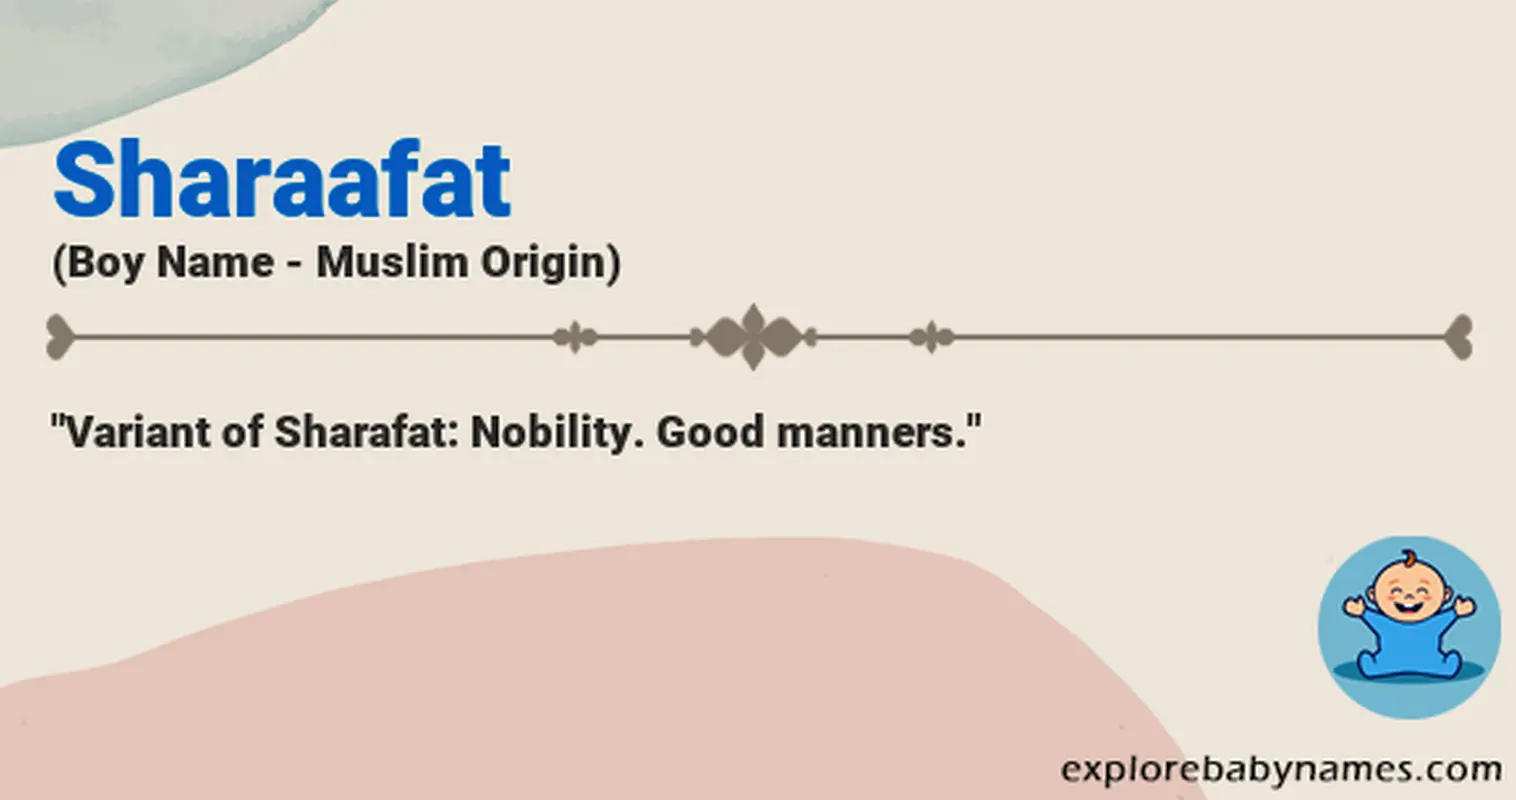 Meaning of Sharaafat